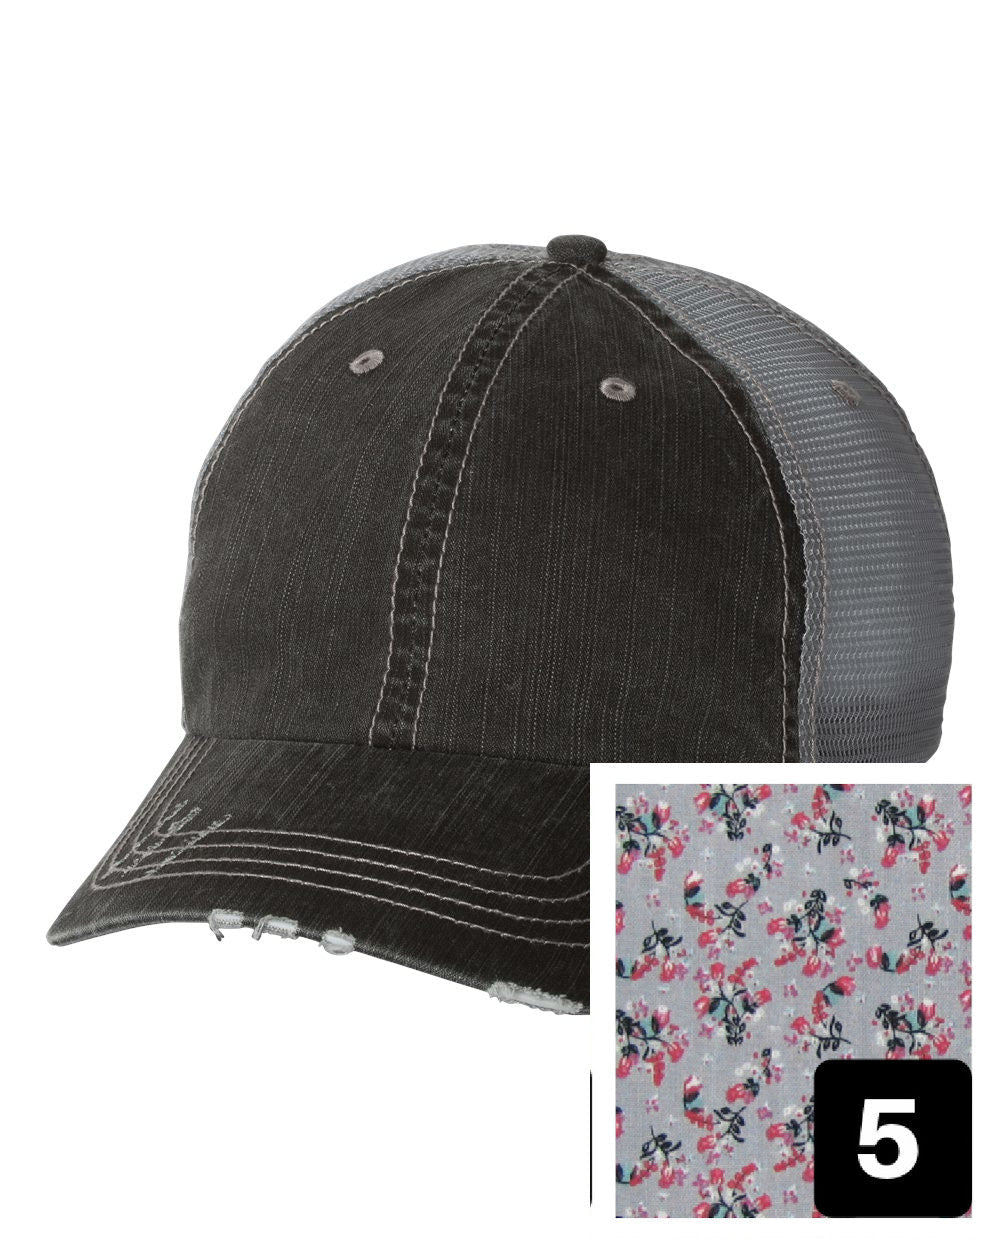 gray distressed trucker hat with purple and pink floral fabric state of Mississippi